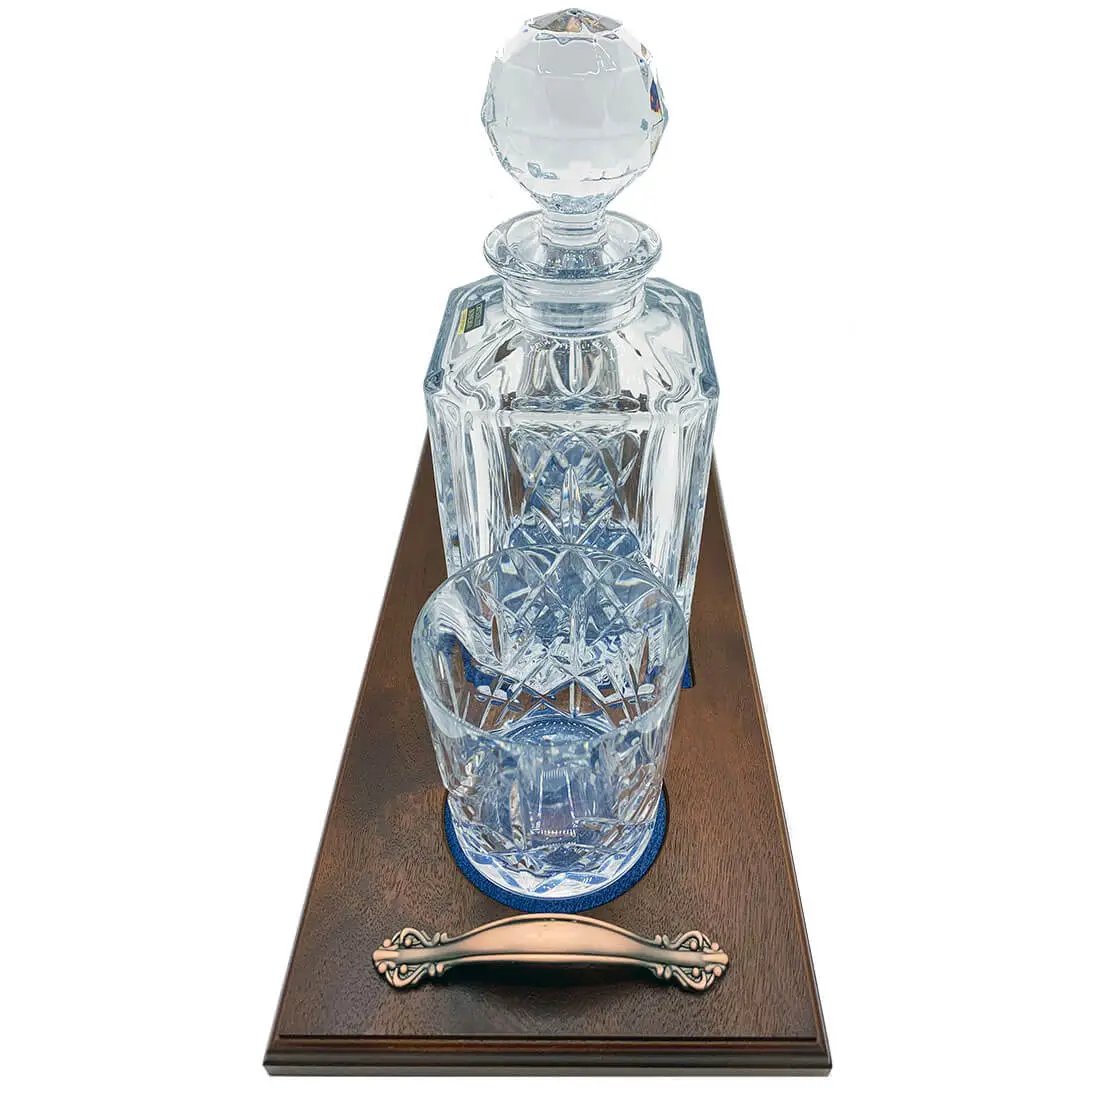 Crystal Whisky Decanter Set with 2 Glasses - John Bull Clothing